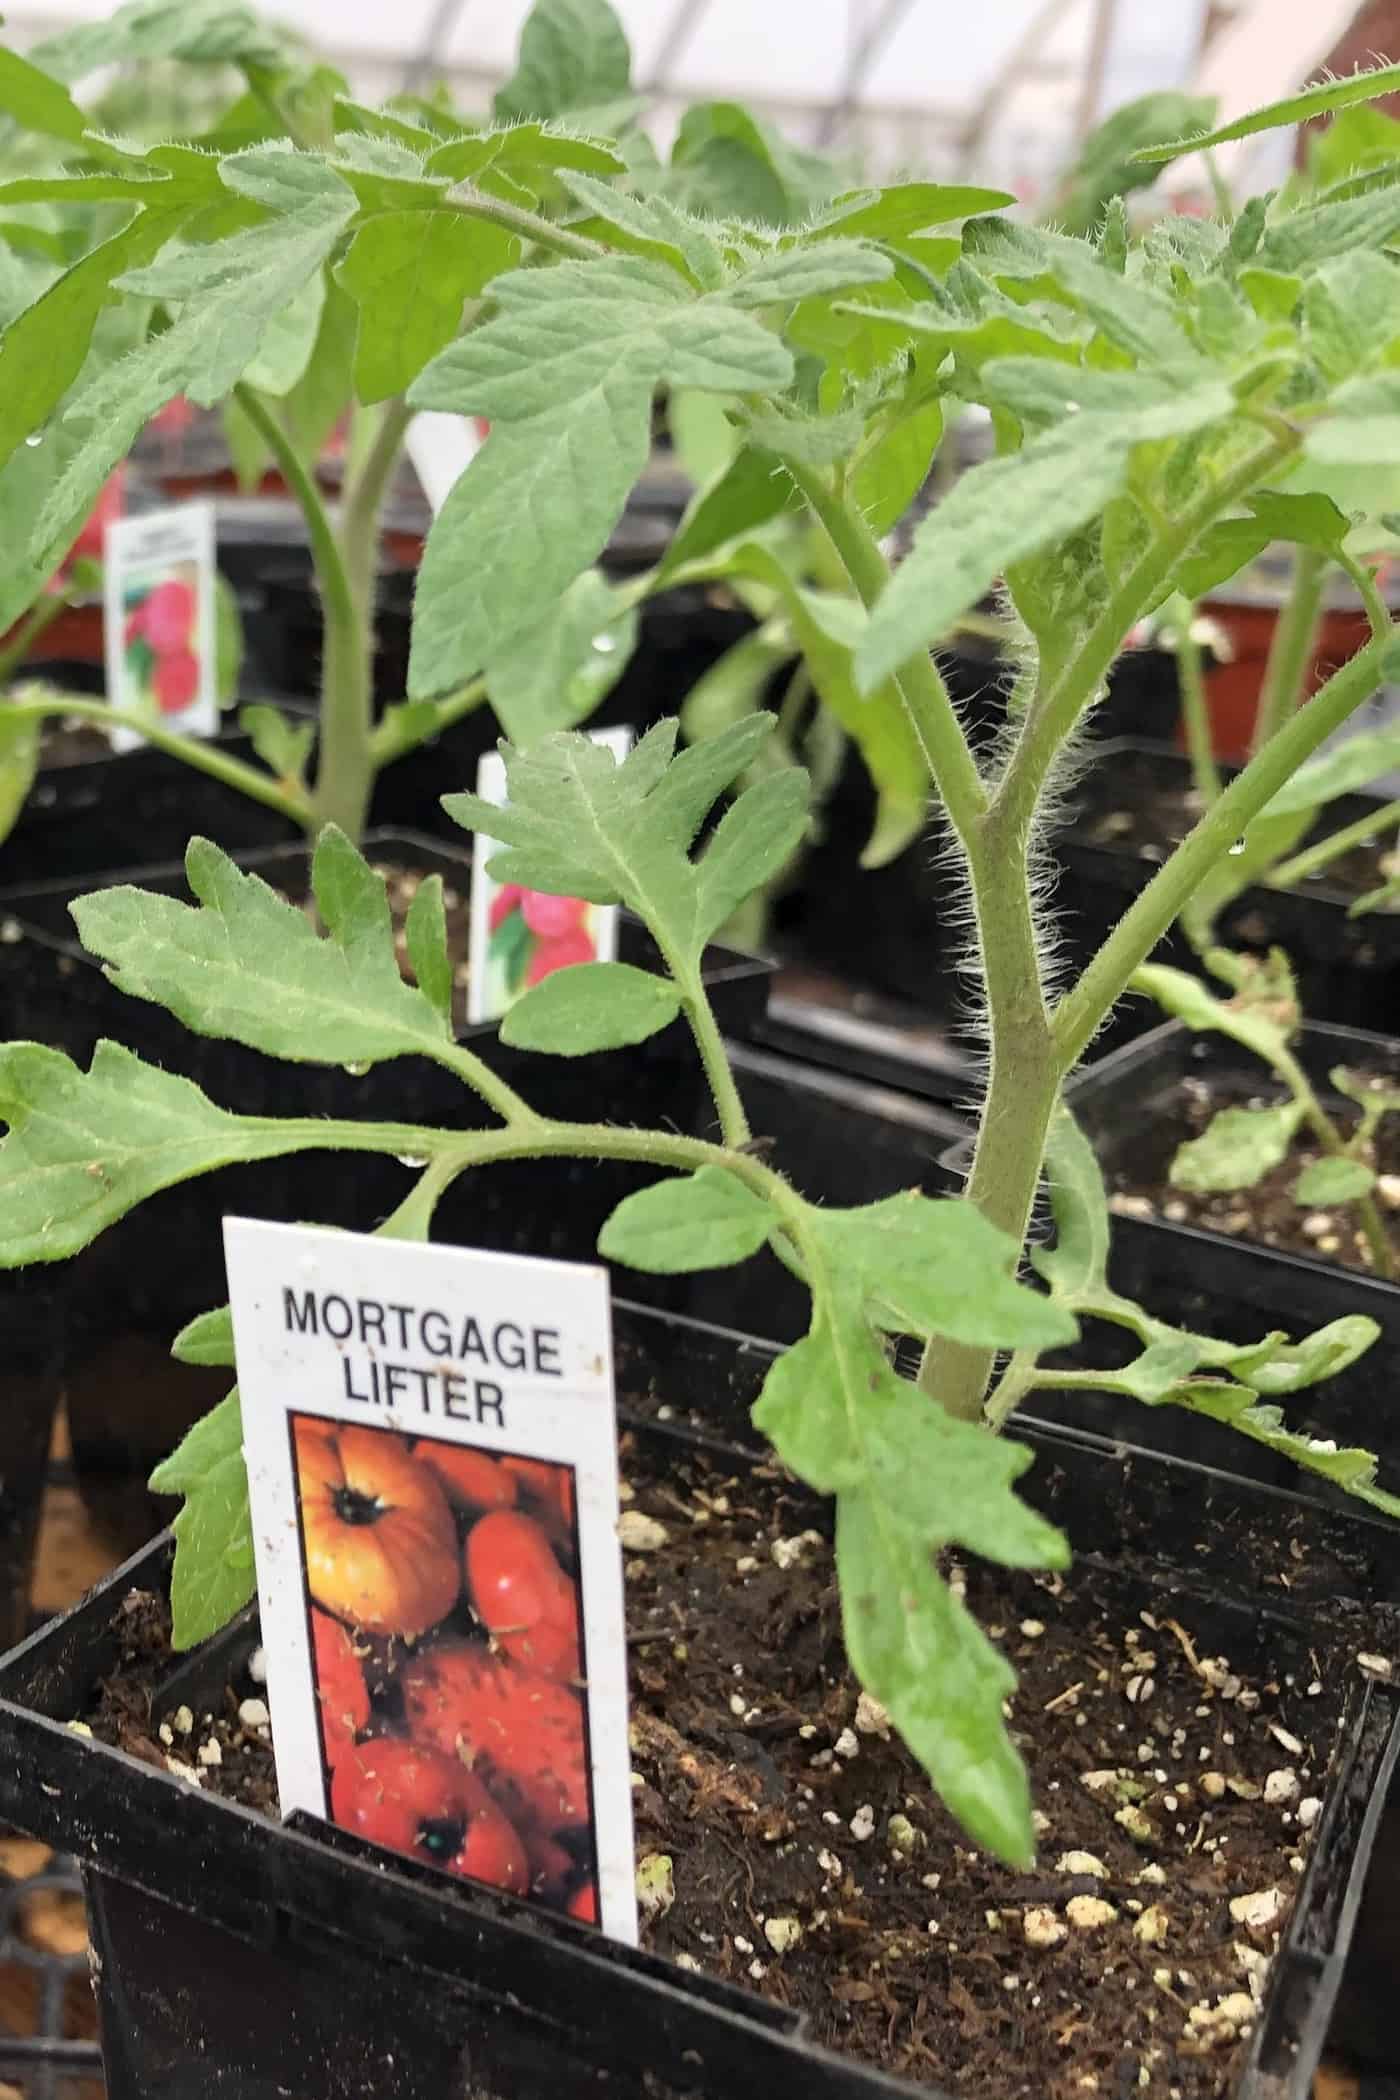 The mortgage lifter tomato - baby seedling plant